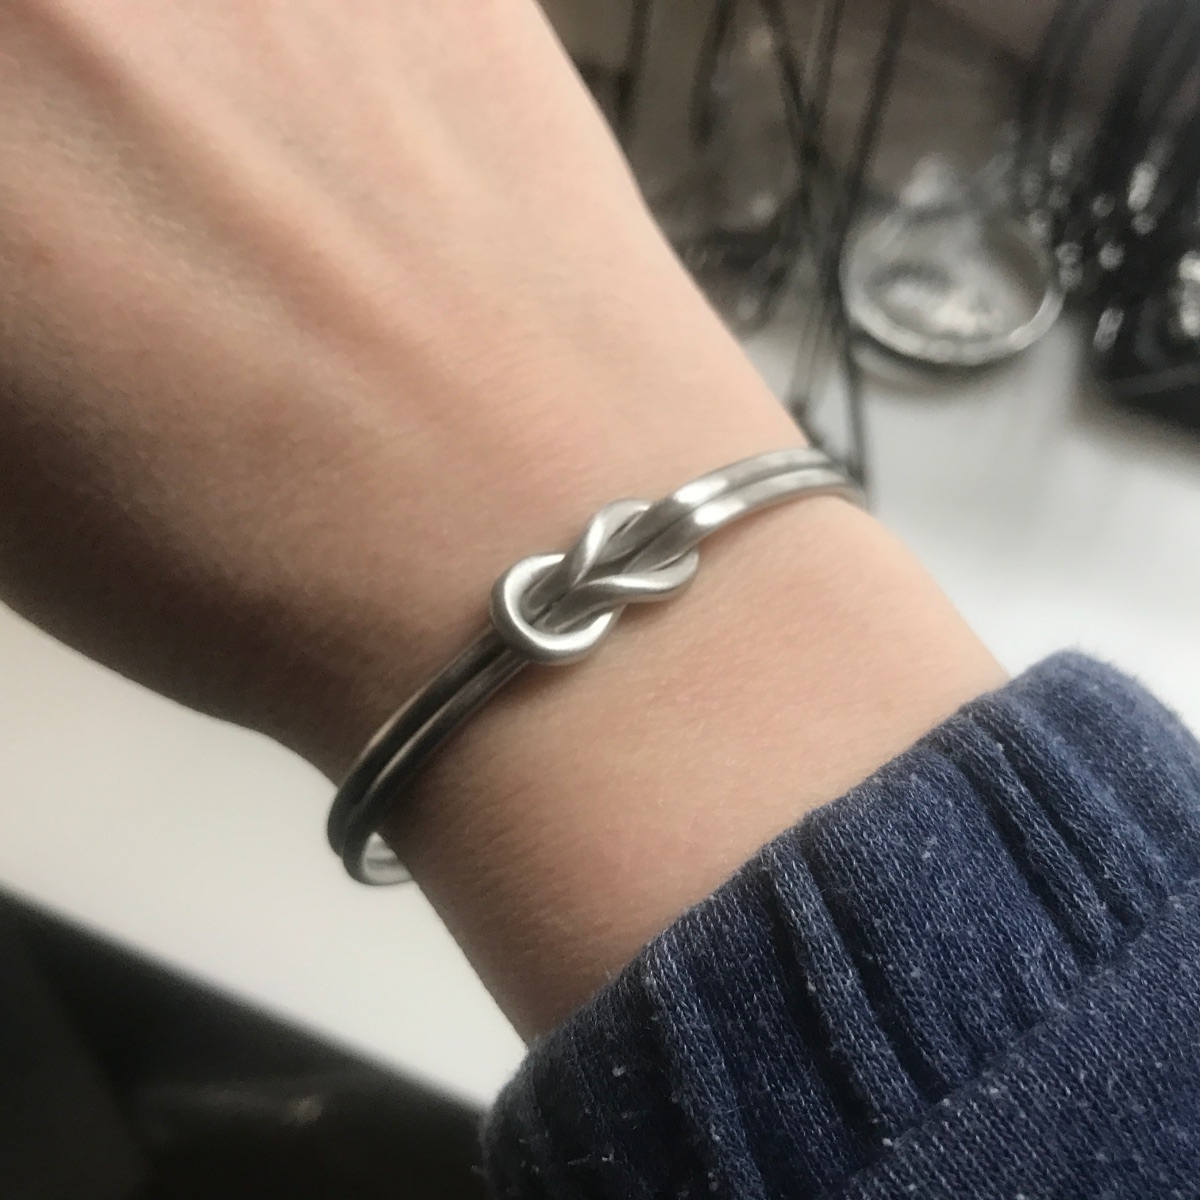 Adjustable Love Knot Bracelet, Silver Infinity Cuff, Stainless Steel Jewelry for Women, Bridesmaid Gift, Teen Daughter, Present for Wife